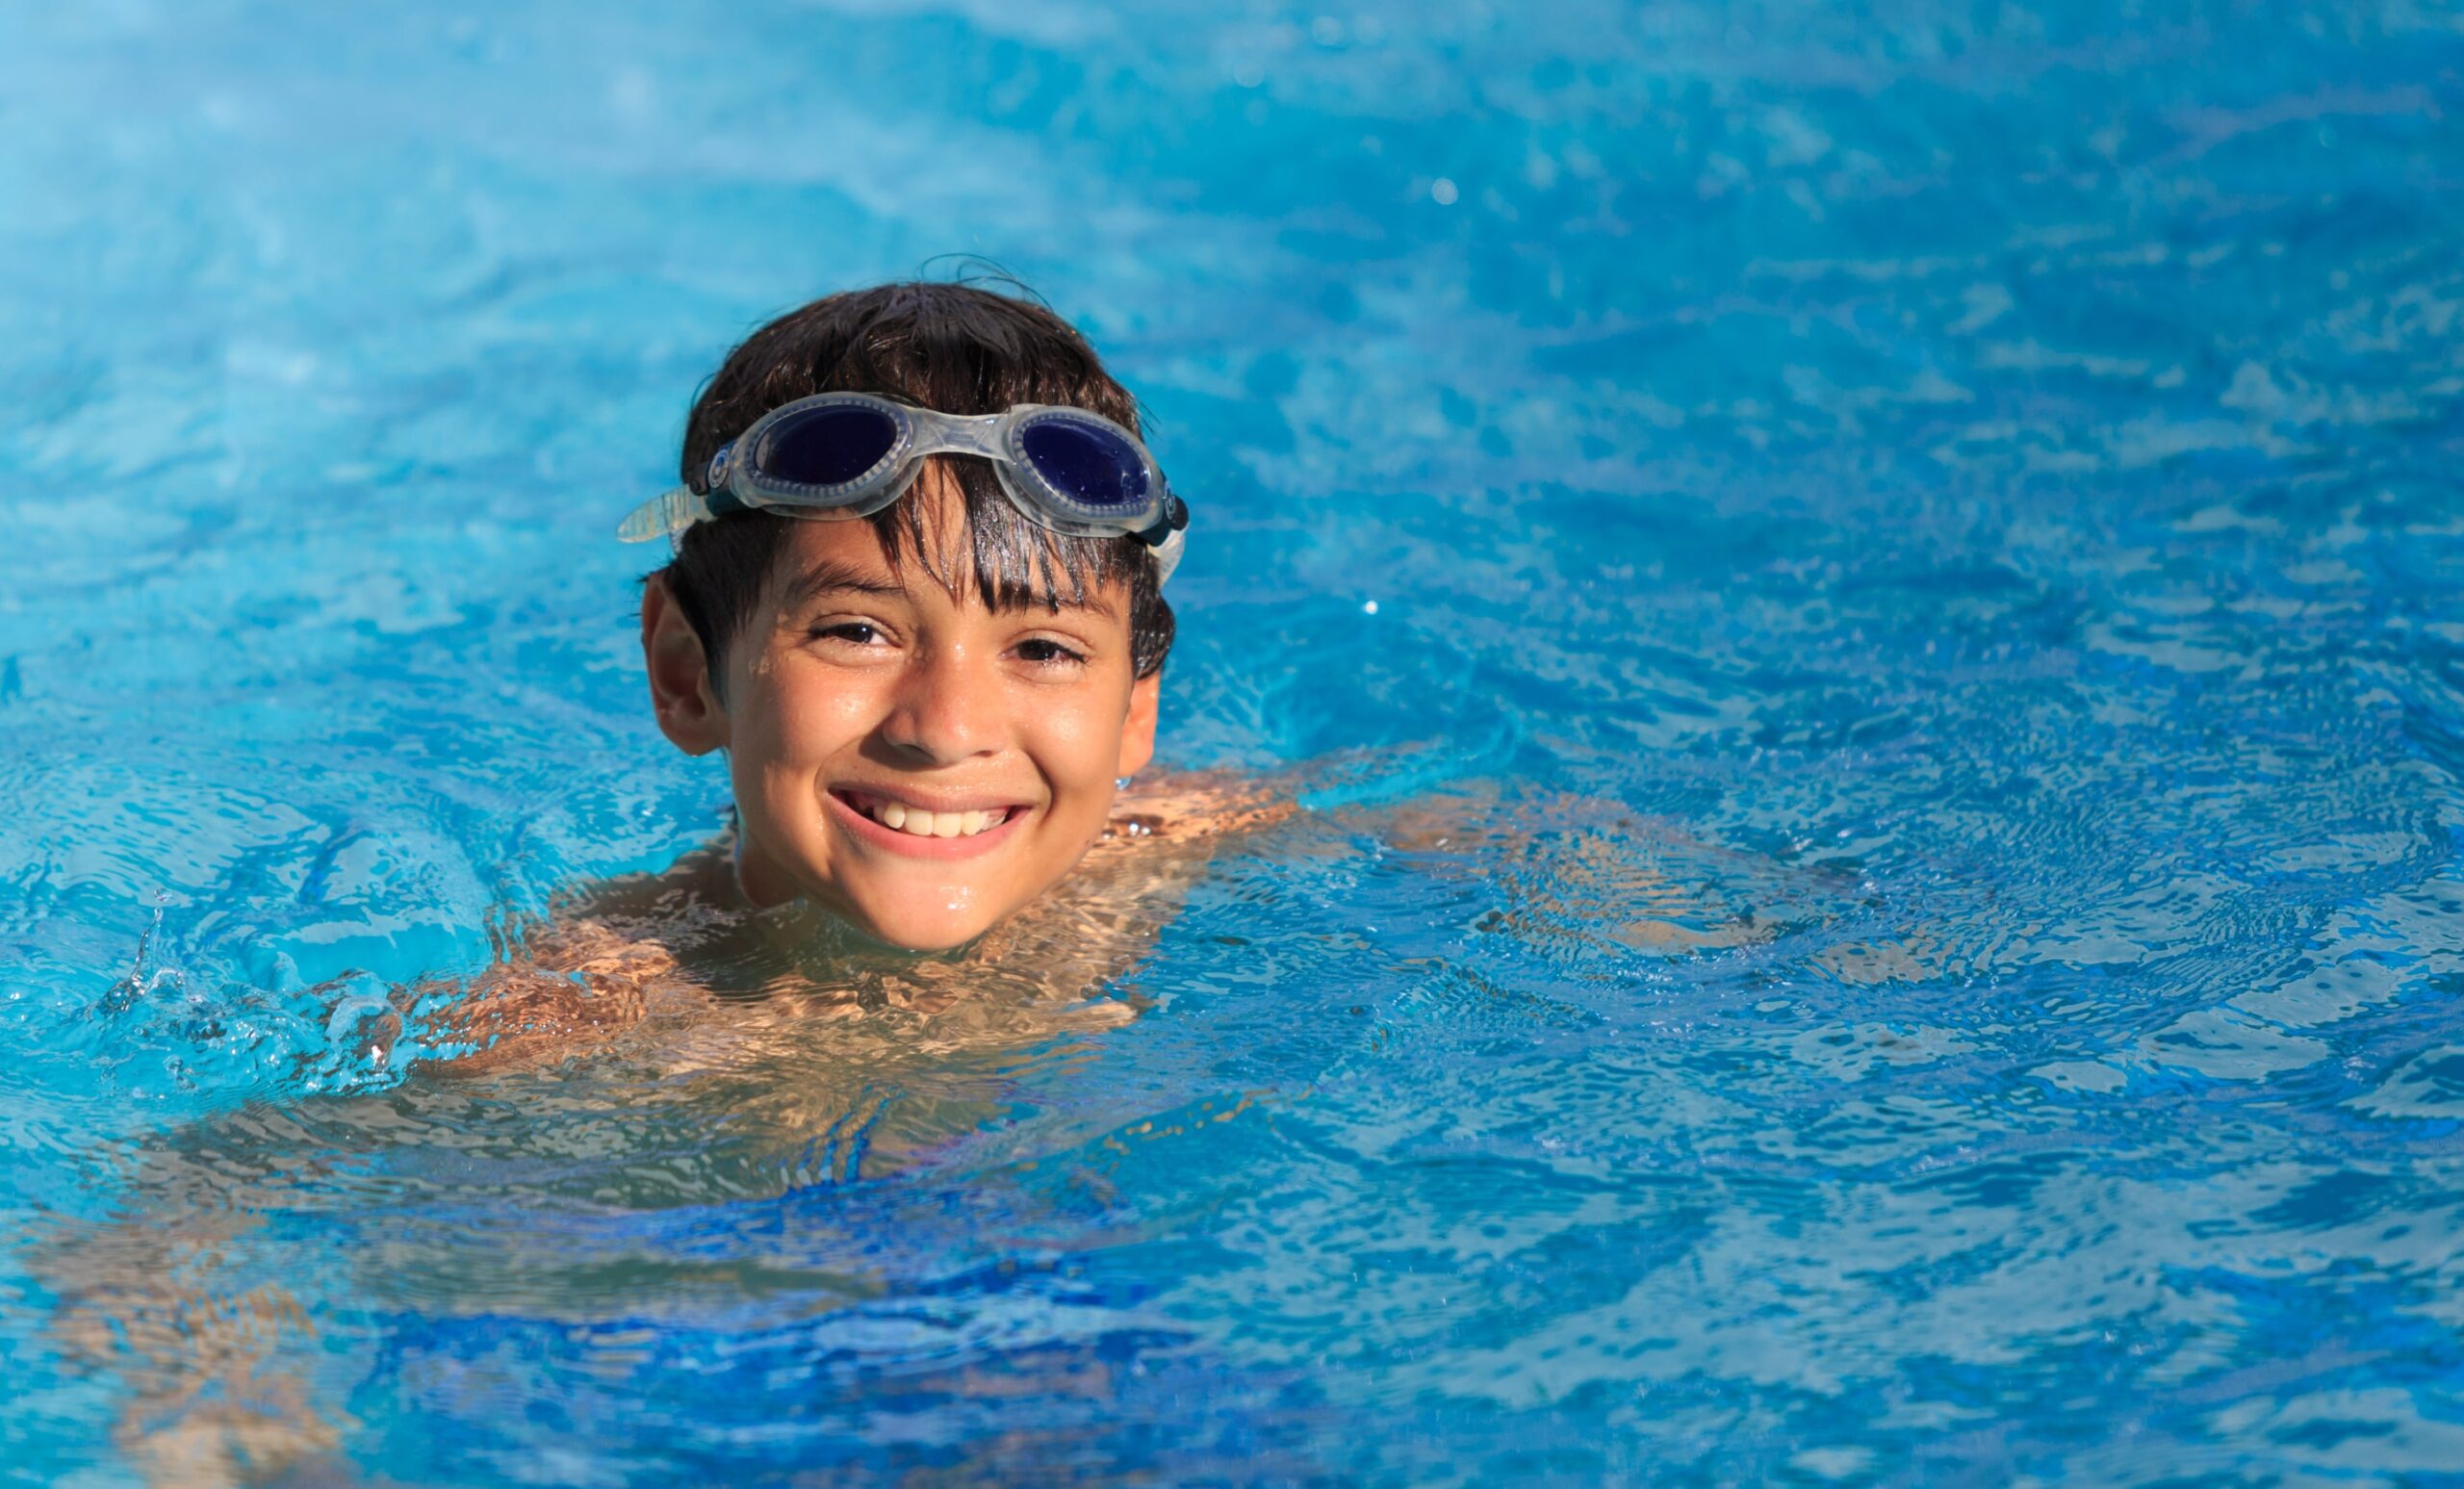 Child smiling in pool